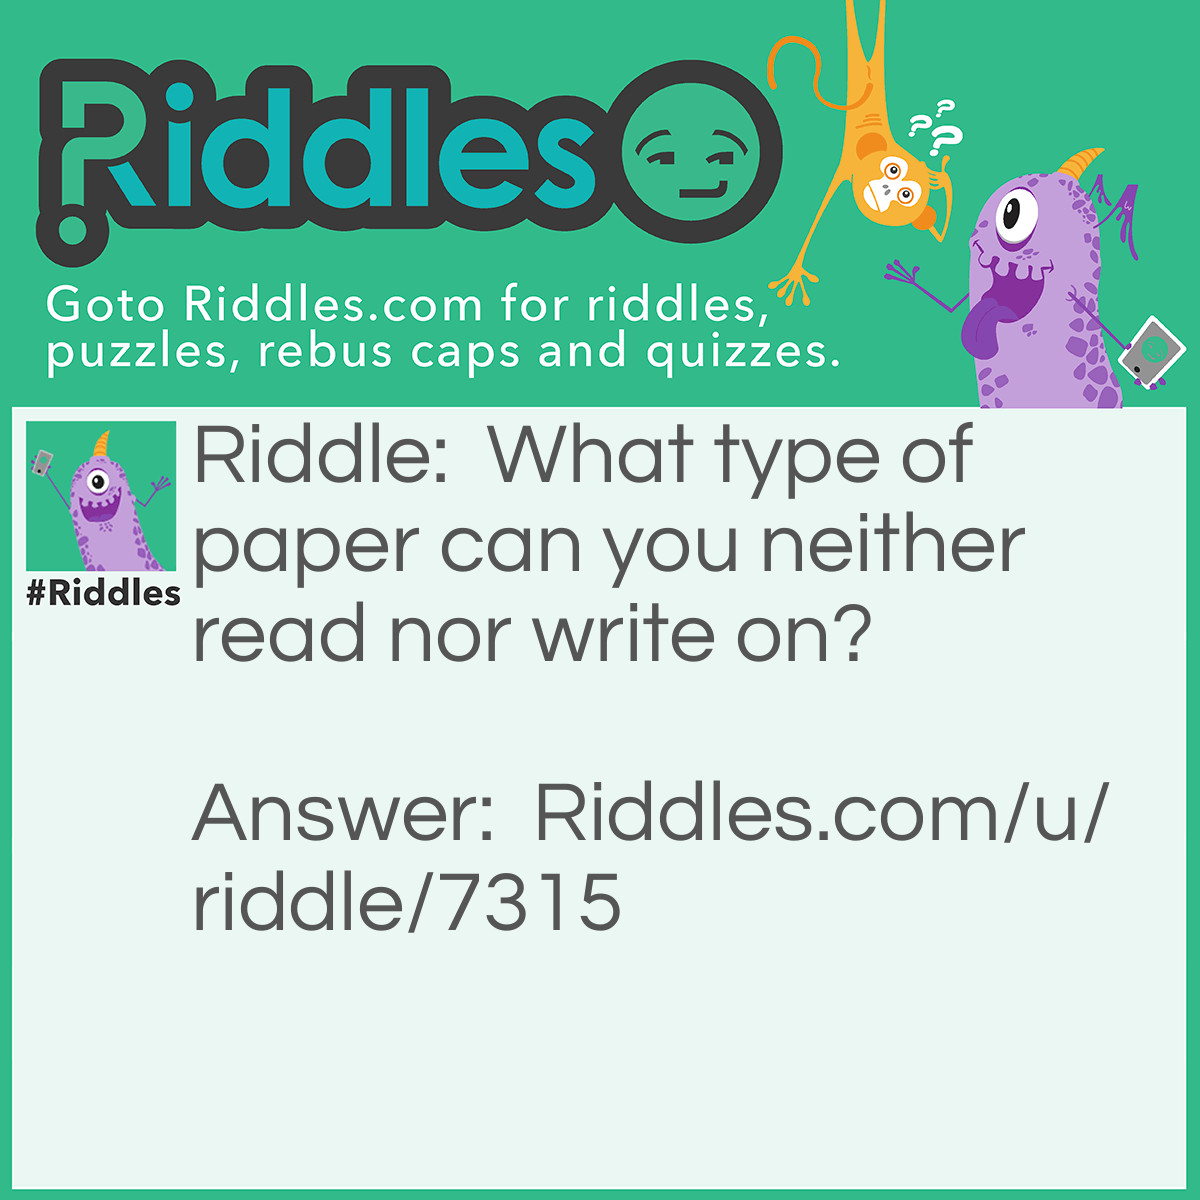 Riddle: What type of paper can you neither read nor write on? Answer: Sandpaper.